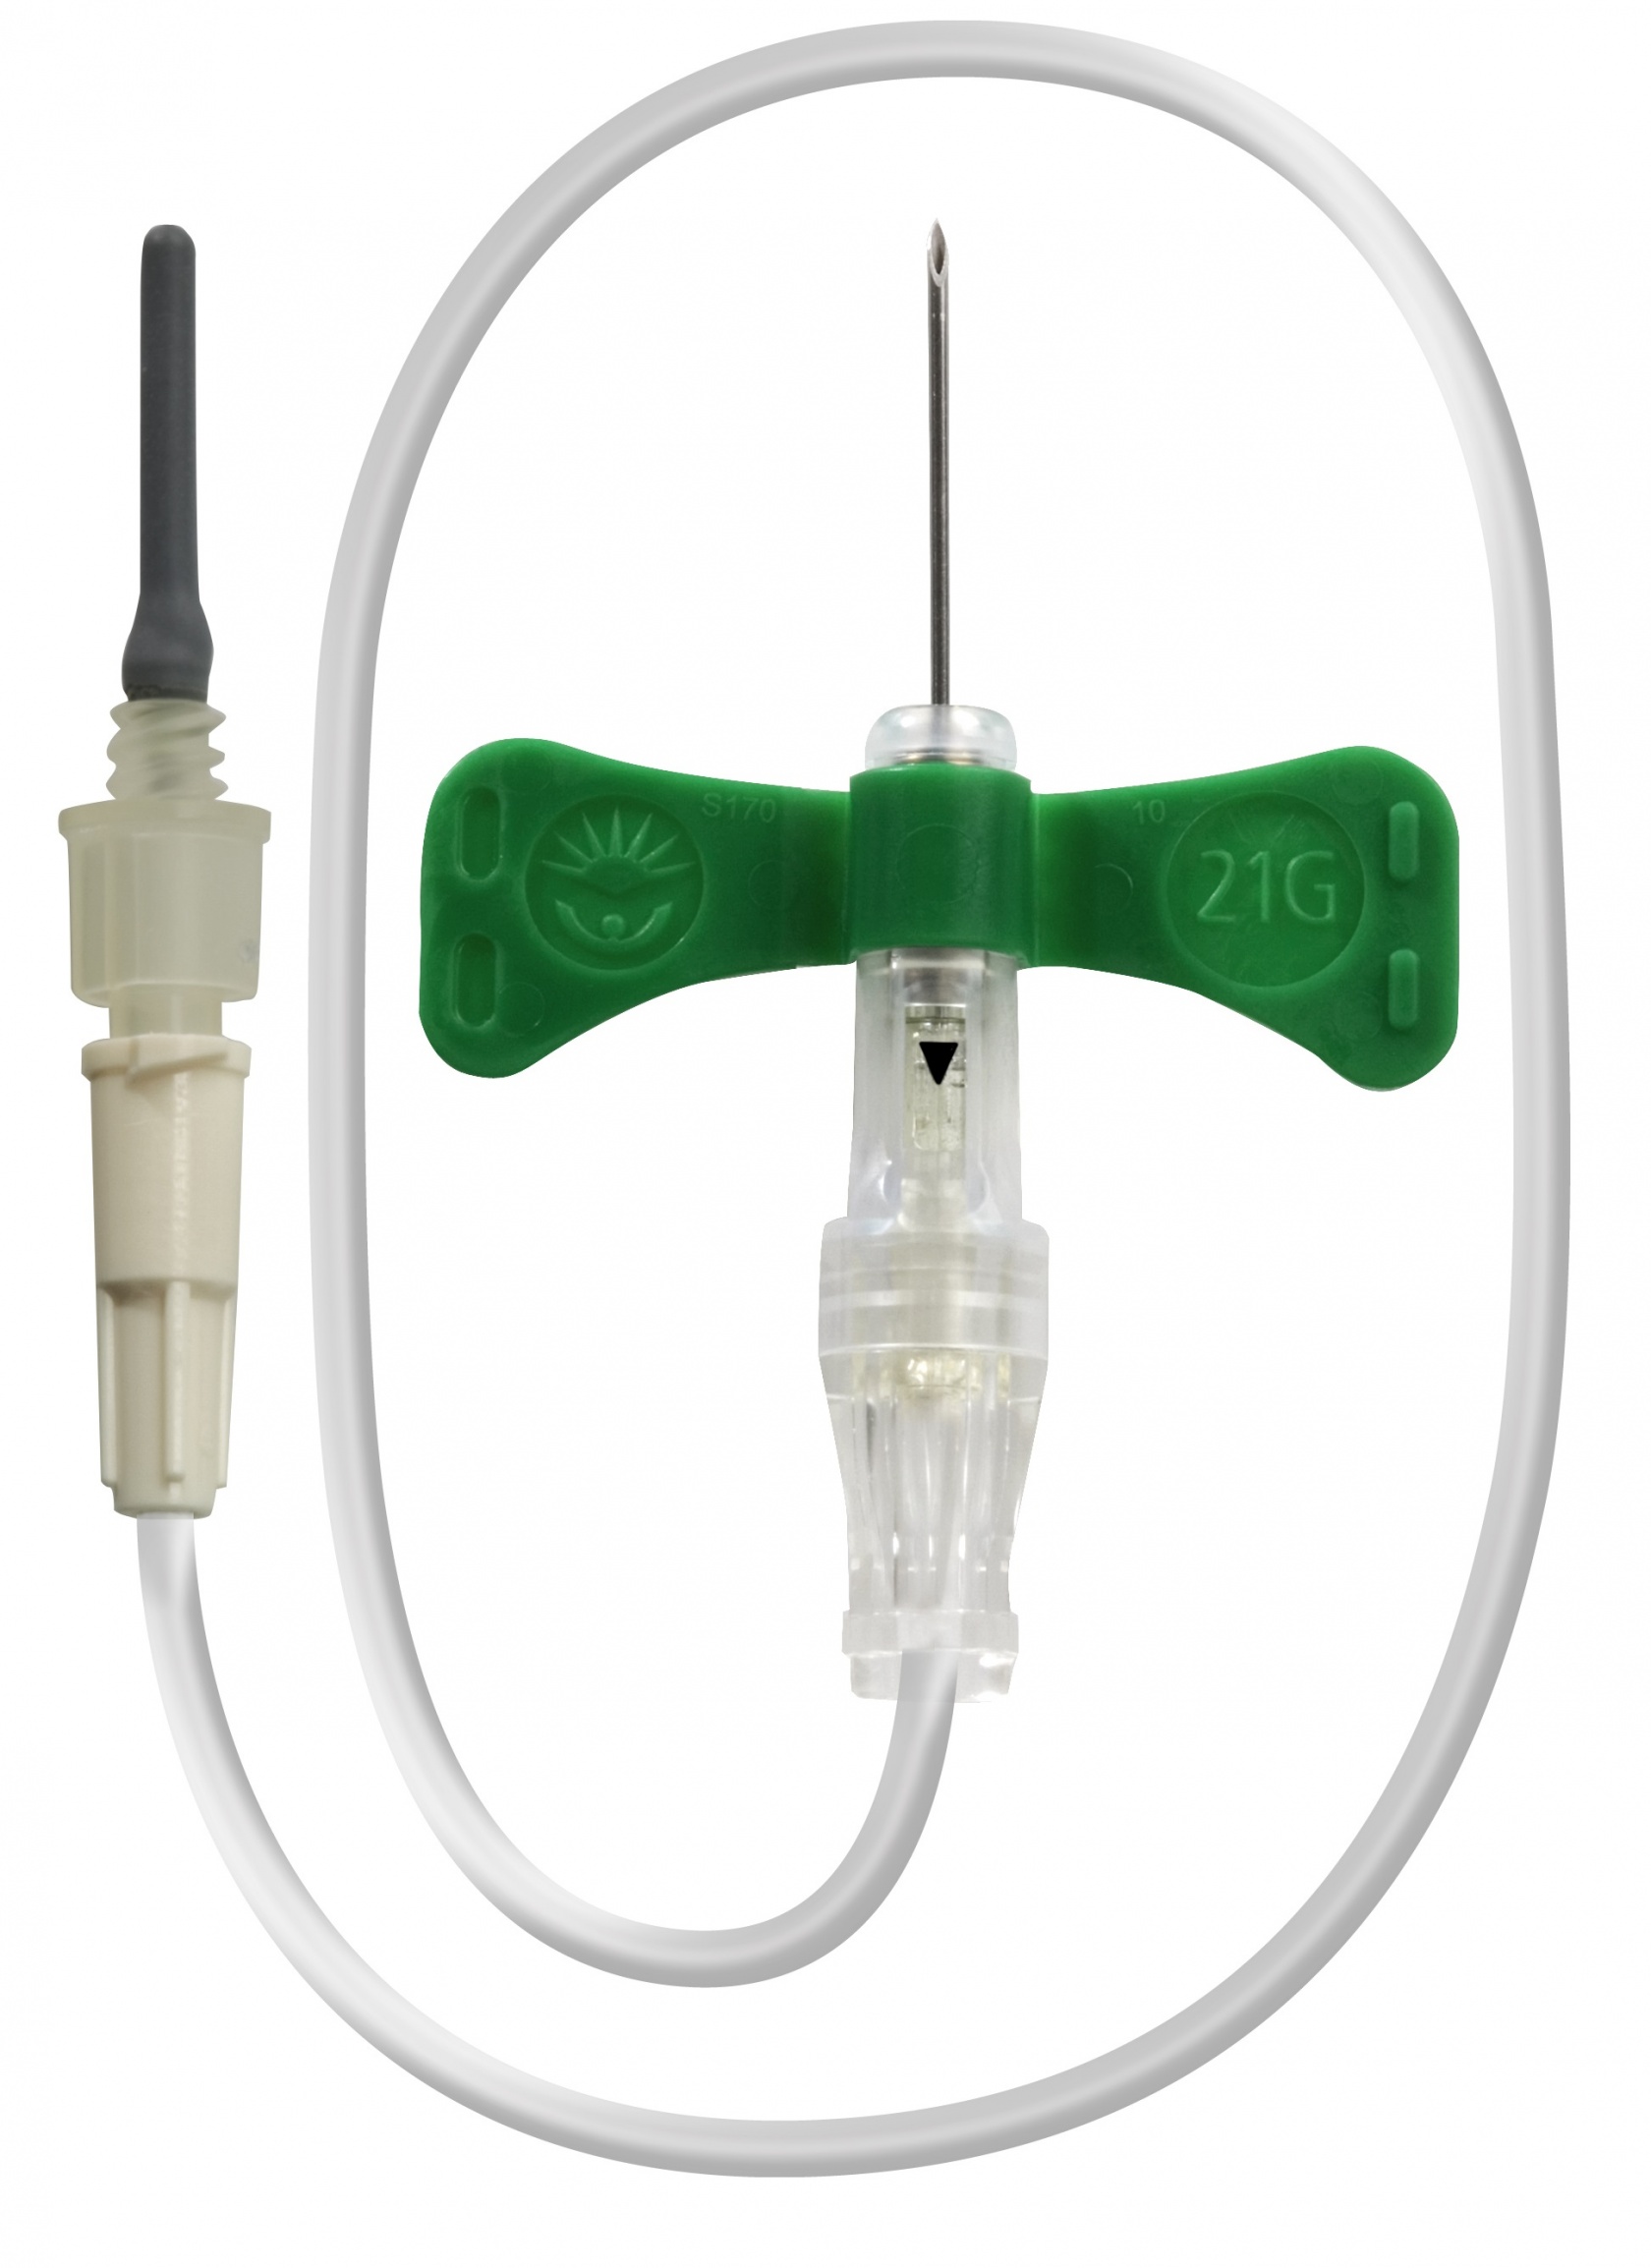 BD Vacutainer Push Button Blood Collection Set 12inch tubing with L/L 21g x 75in (Green) image 0